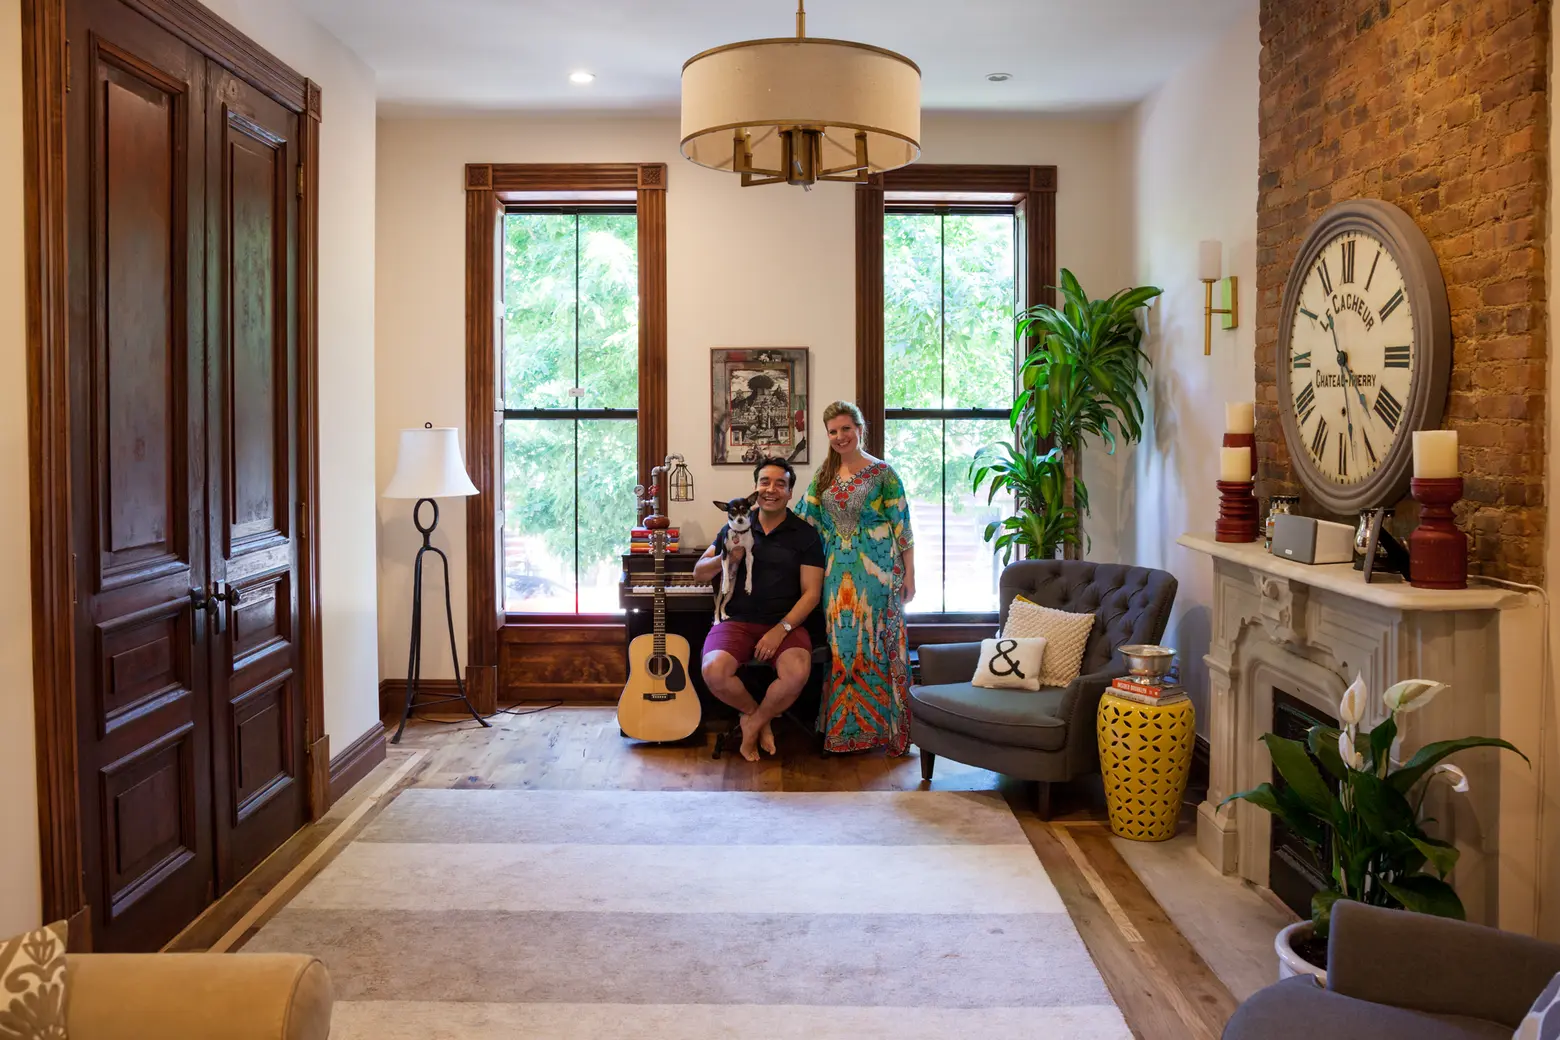 Our 2,500sqft: New homeowners Mark and Lauren take us inside their relaxed Bed-Stuy brownstone